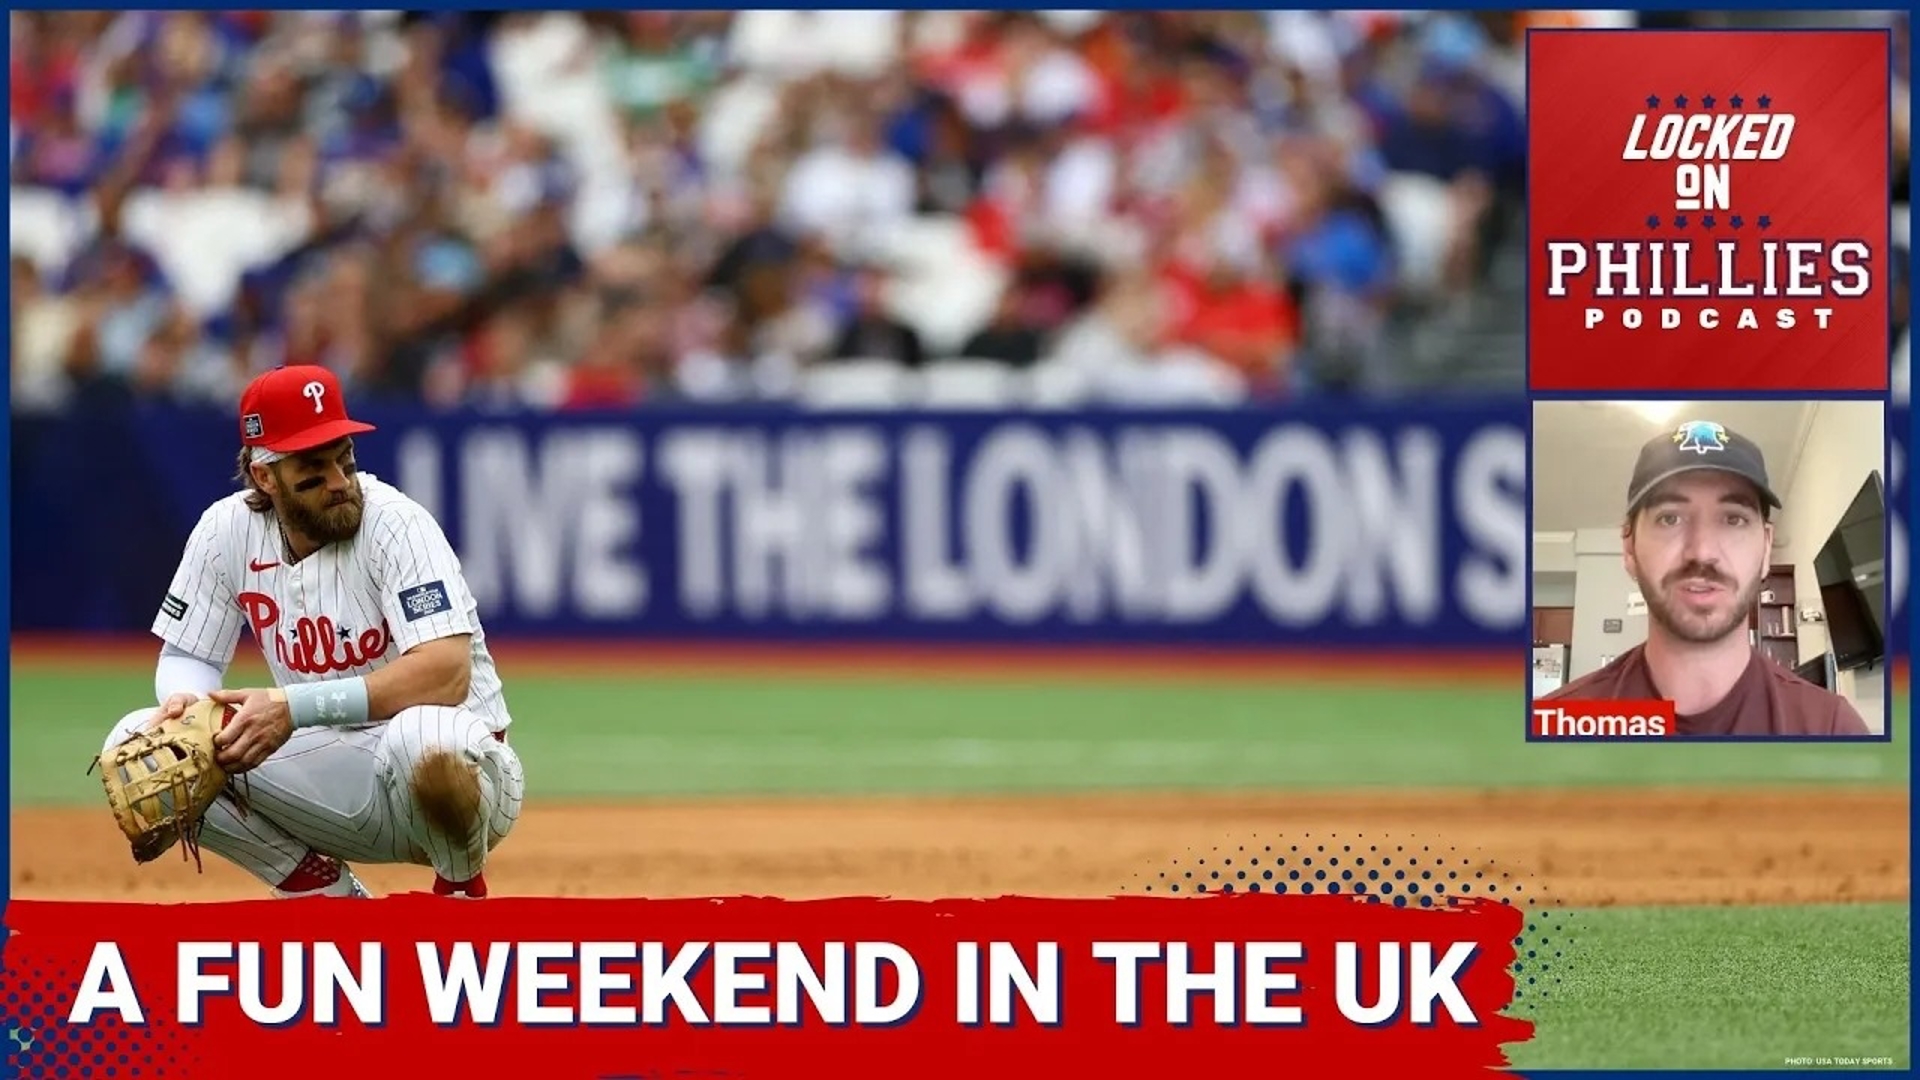 In today's episode, Connor recaps a really cool weekend in London as the Philadelphia Phillies split their 2 game series with the New York Mets.